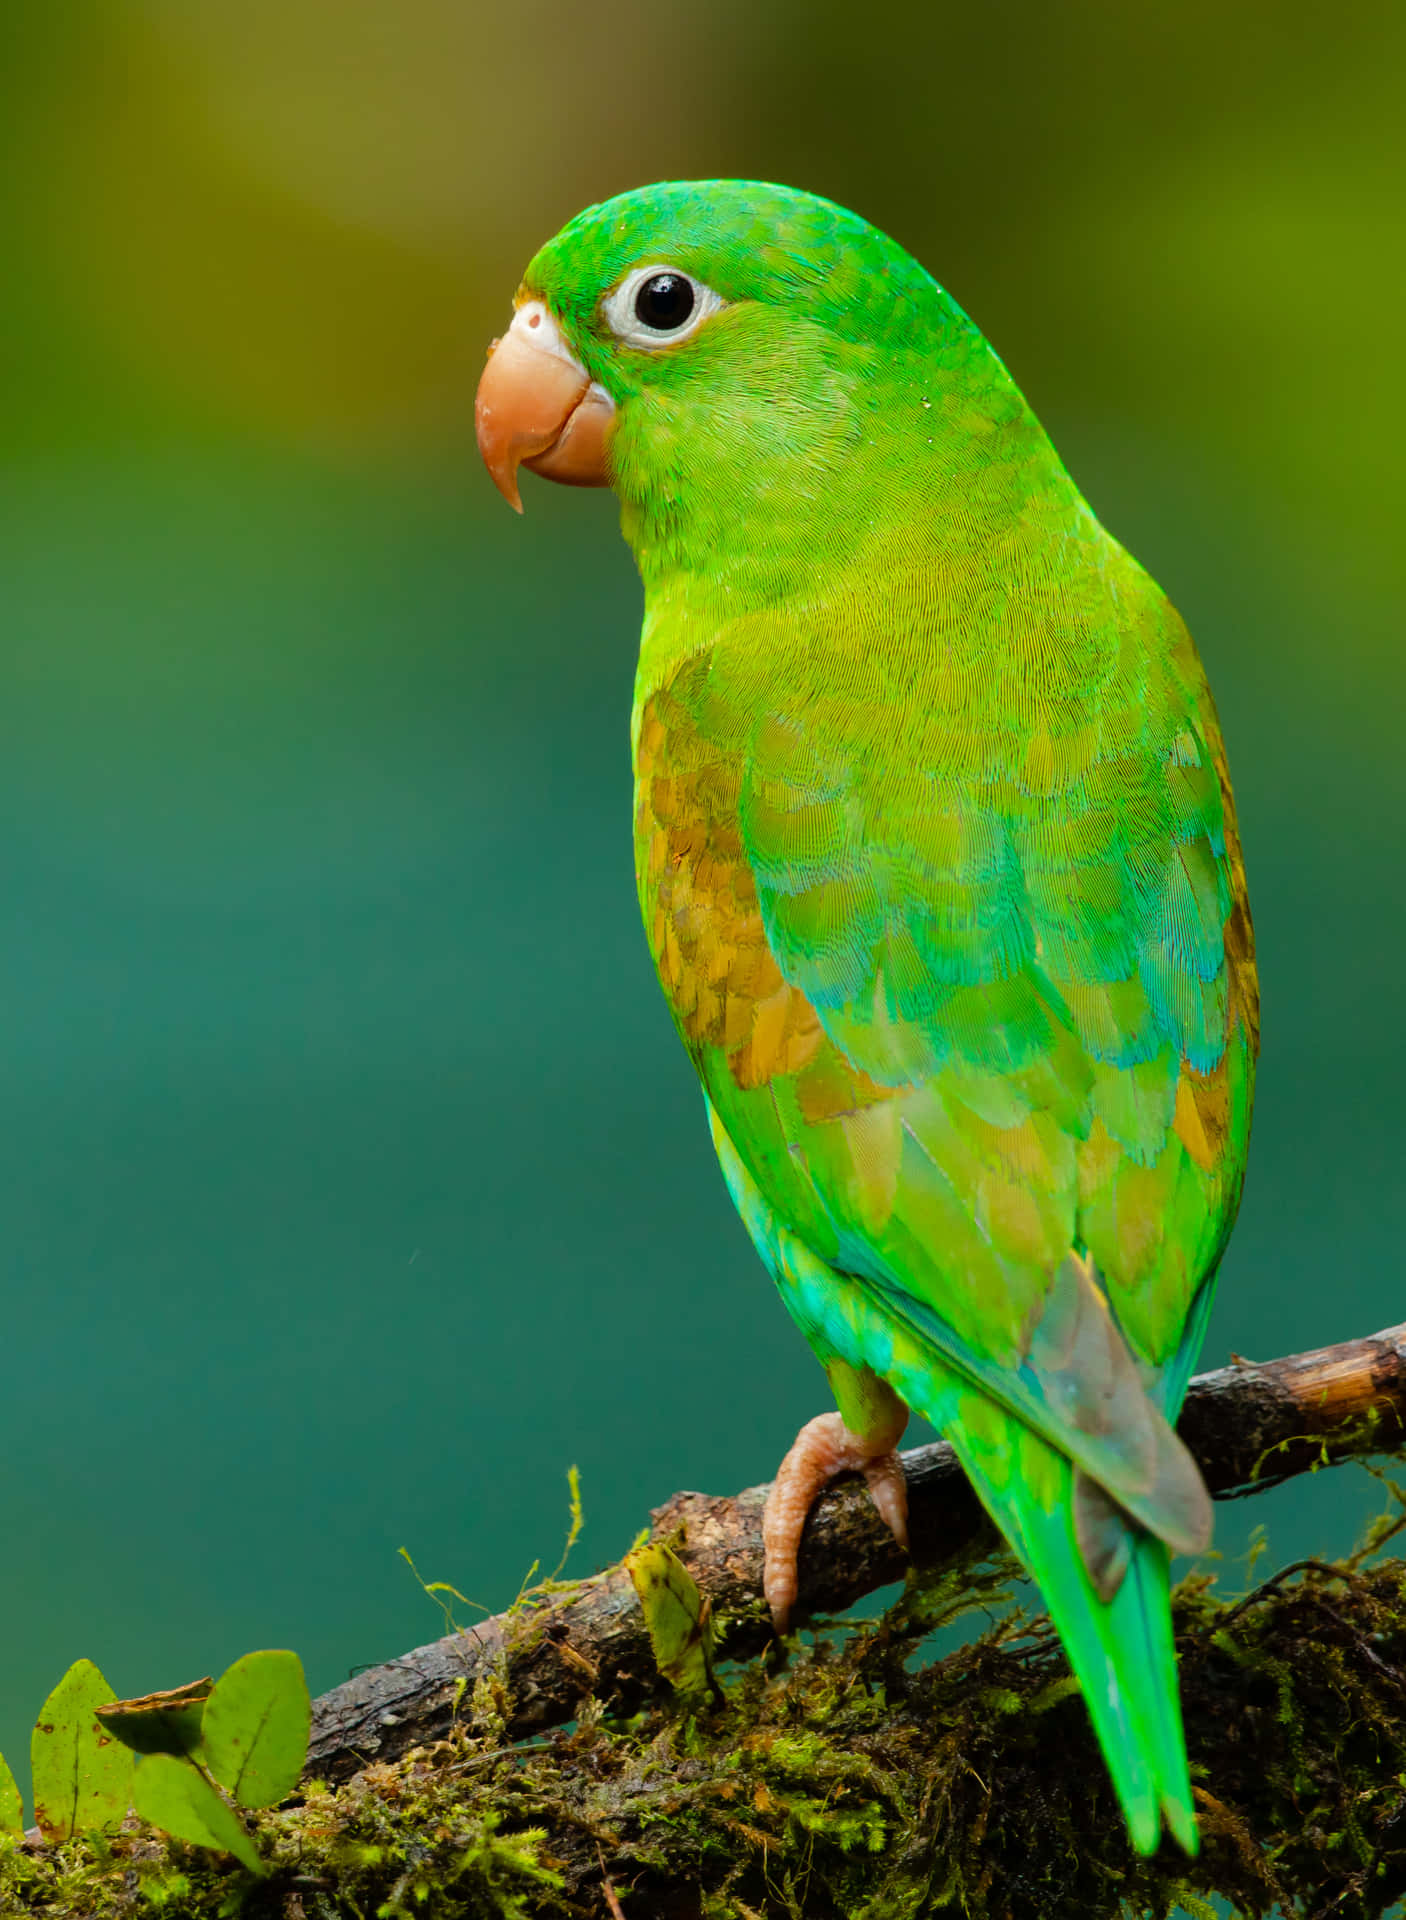 A colorful parrot perched atop a tree